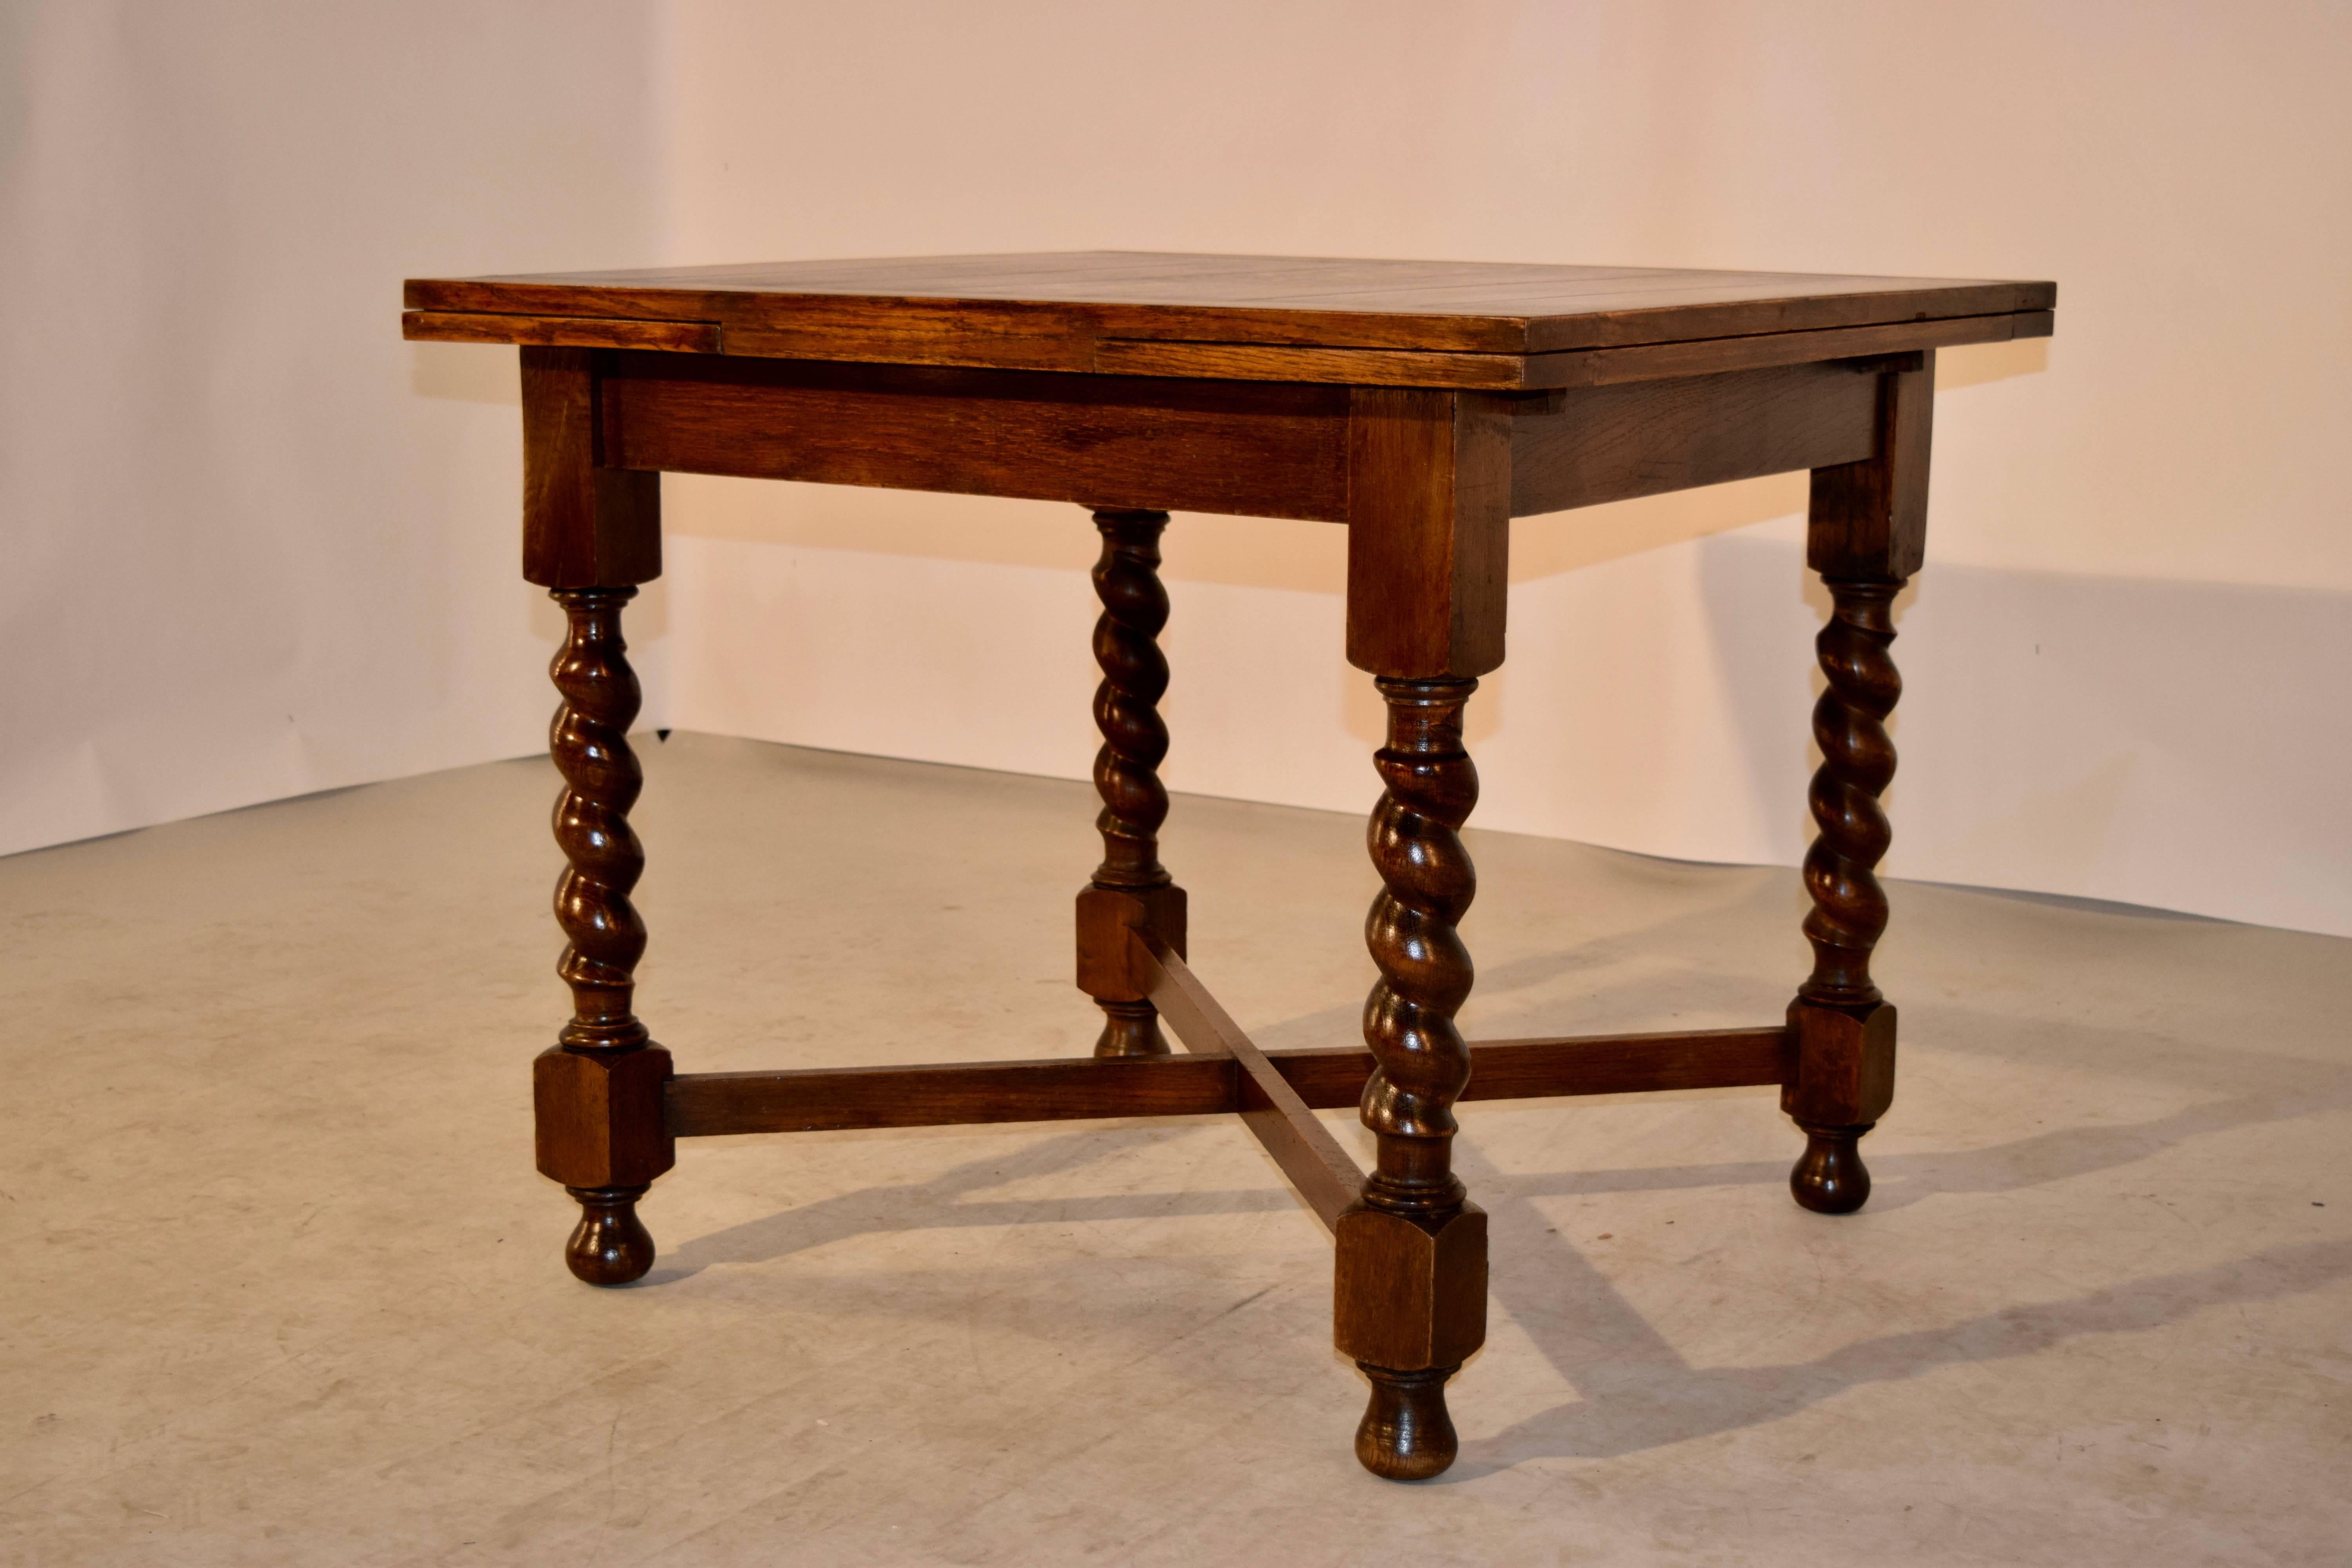 English oak table with draw-leaves, circa 1900. The top and leaves are paneled and follow down to a simple apron and four hand-turned barley twist legs, one of which is slightly slanted, as seen in the photos. The legs are joined by cross